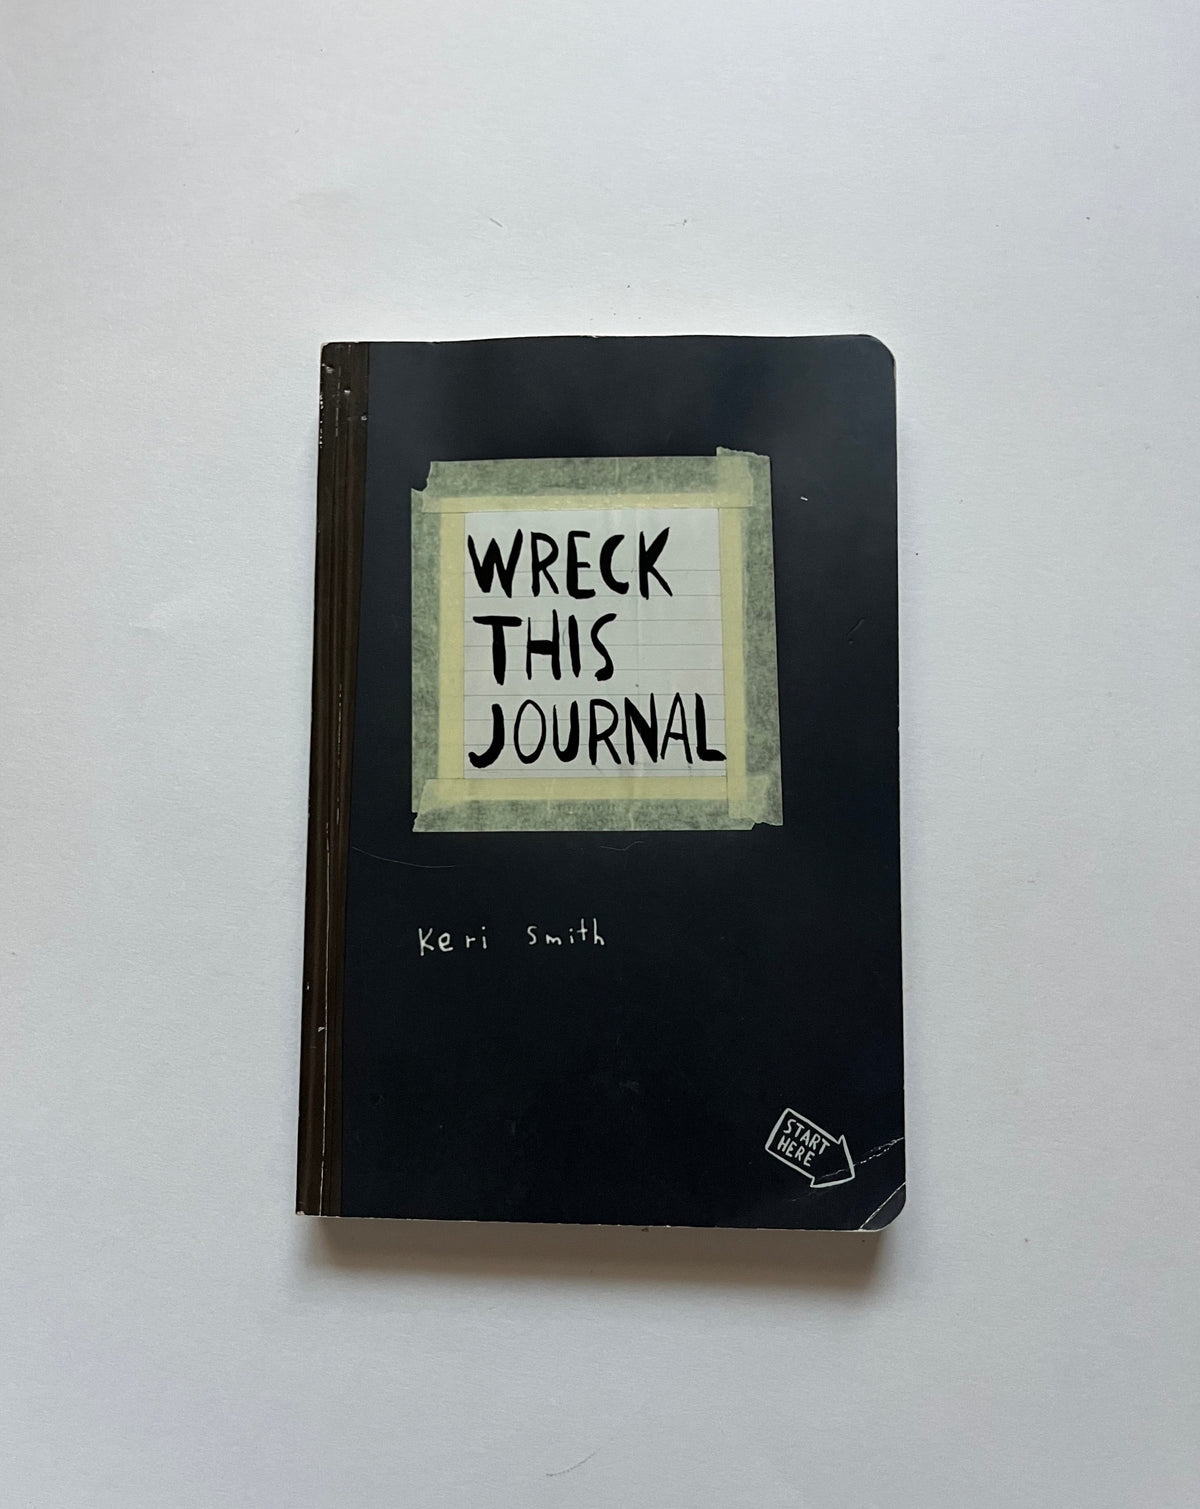 DONATE: Wreck This Journal by Keri Smith